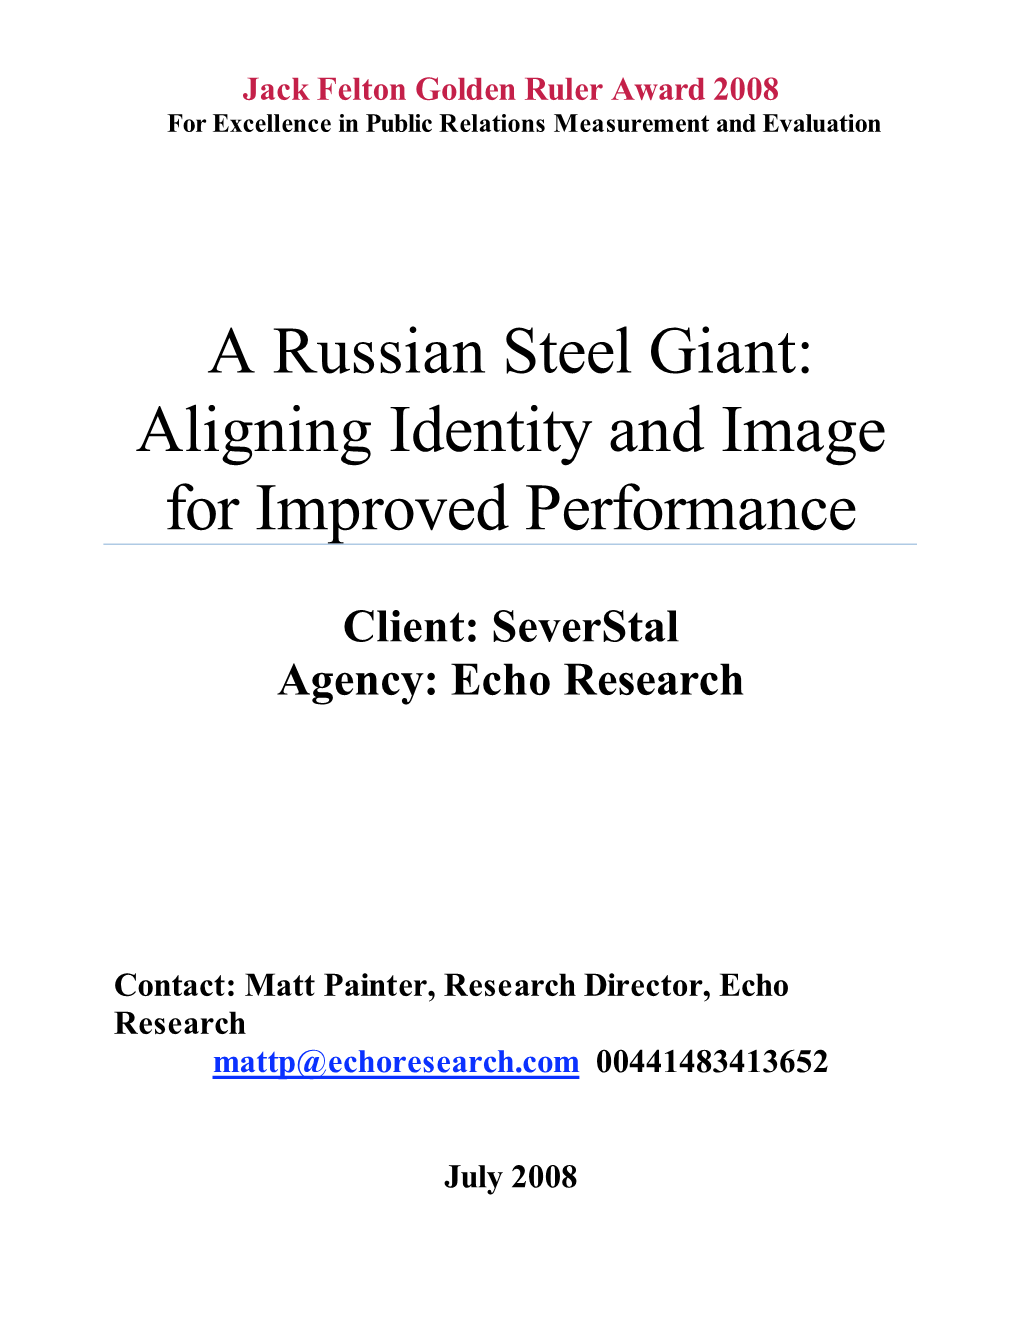 Severstal and Echo Research, “A Russian Steel Giant: Aligning